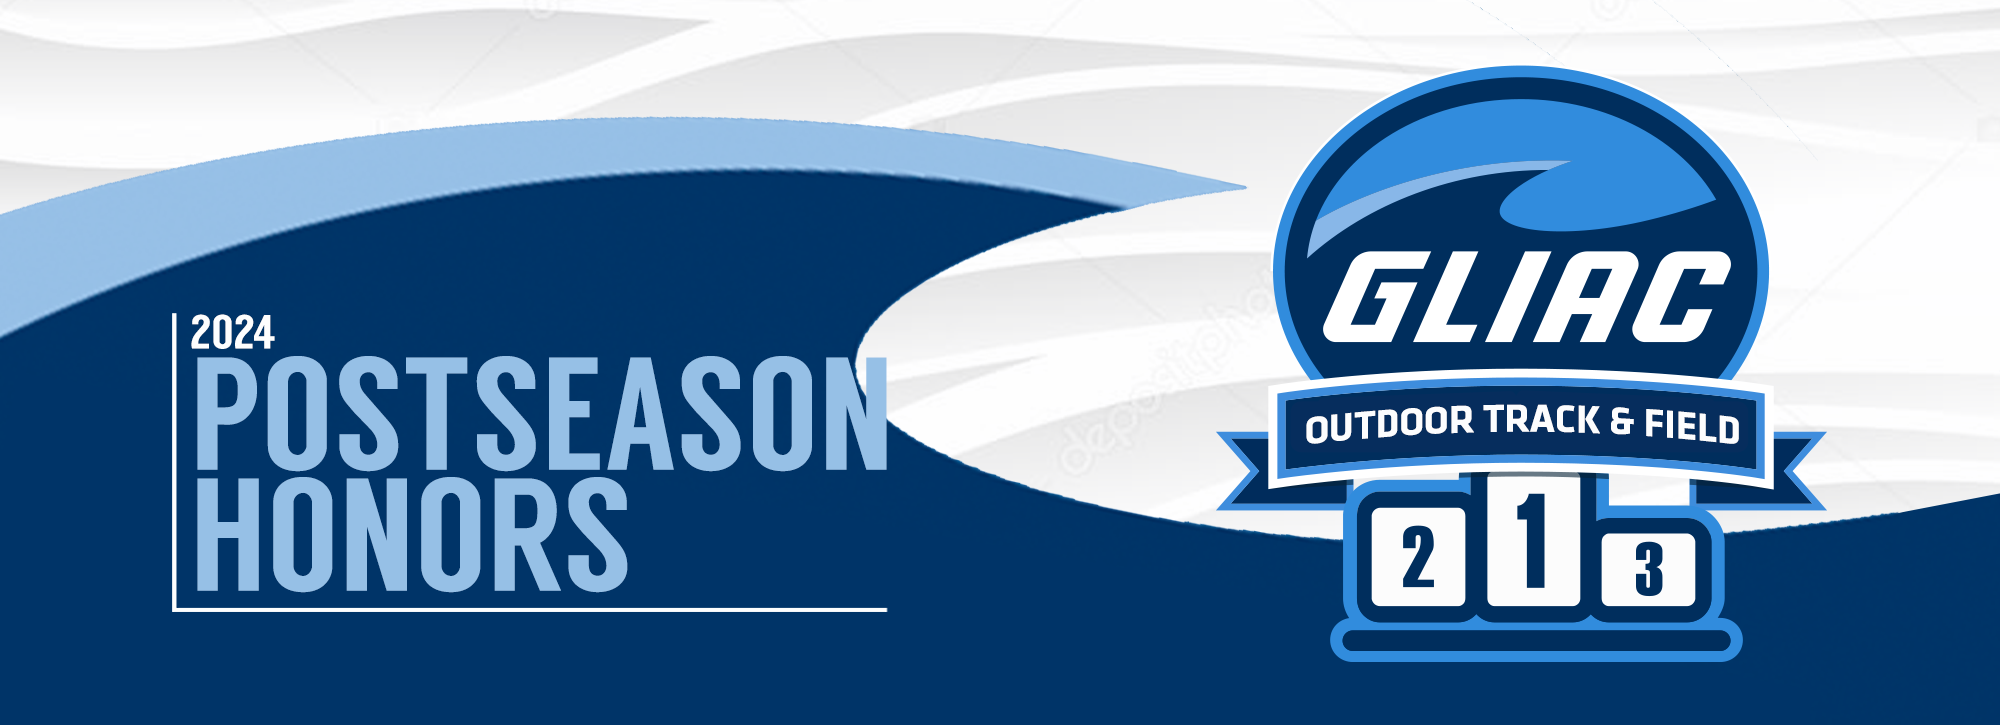 GLIAC honors outdoor track & field athletes of the year